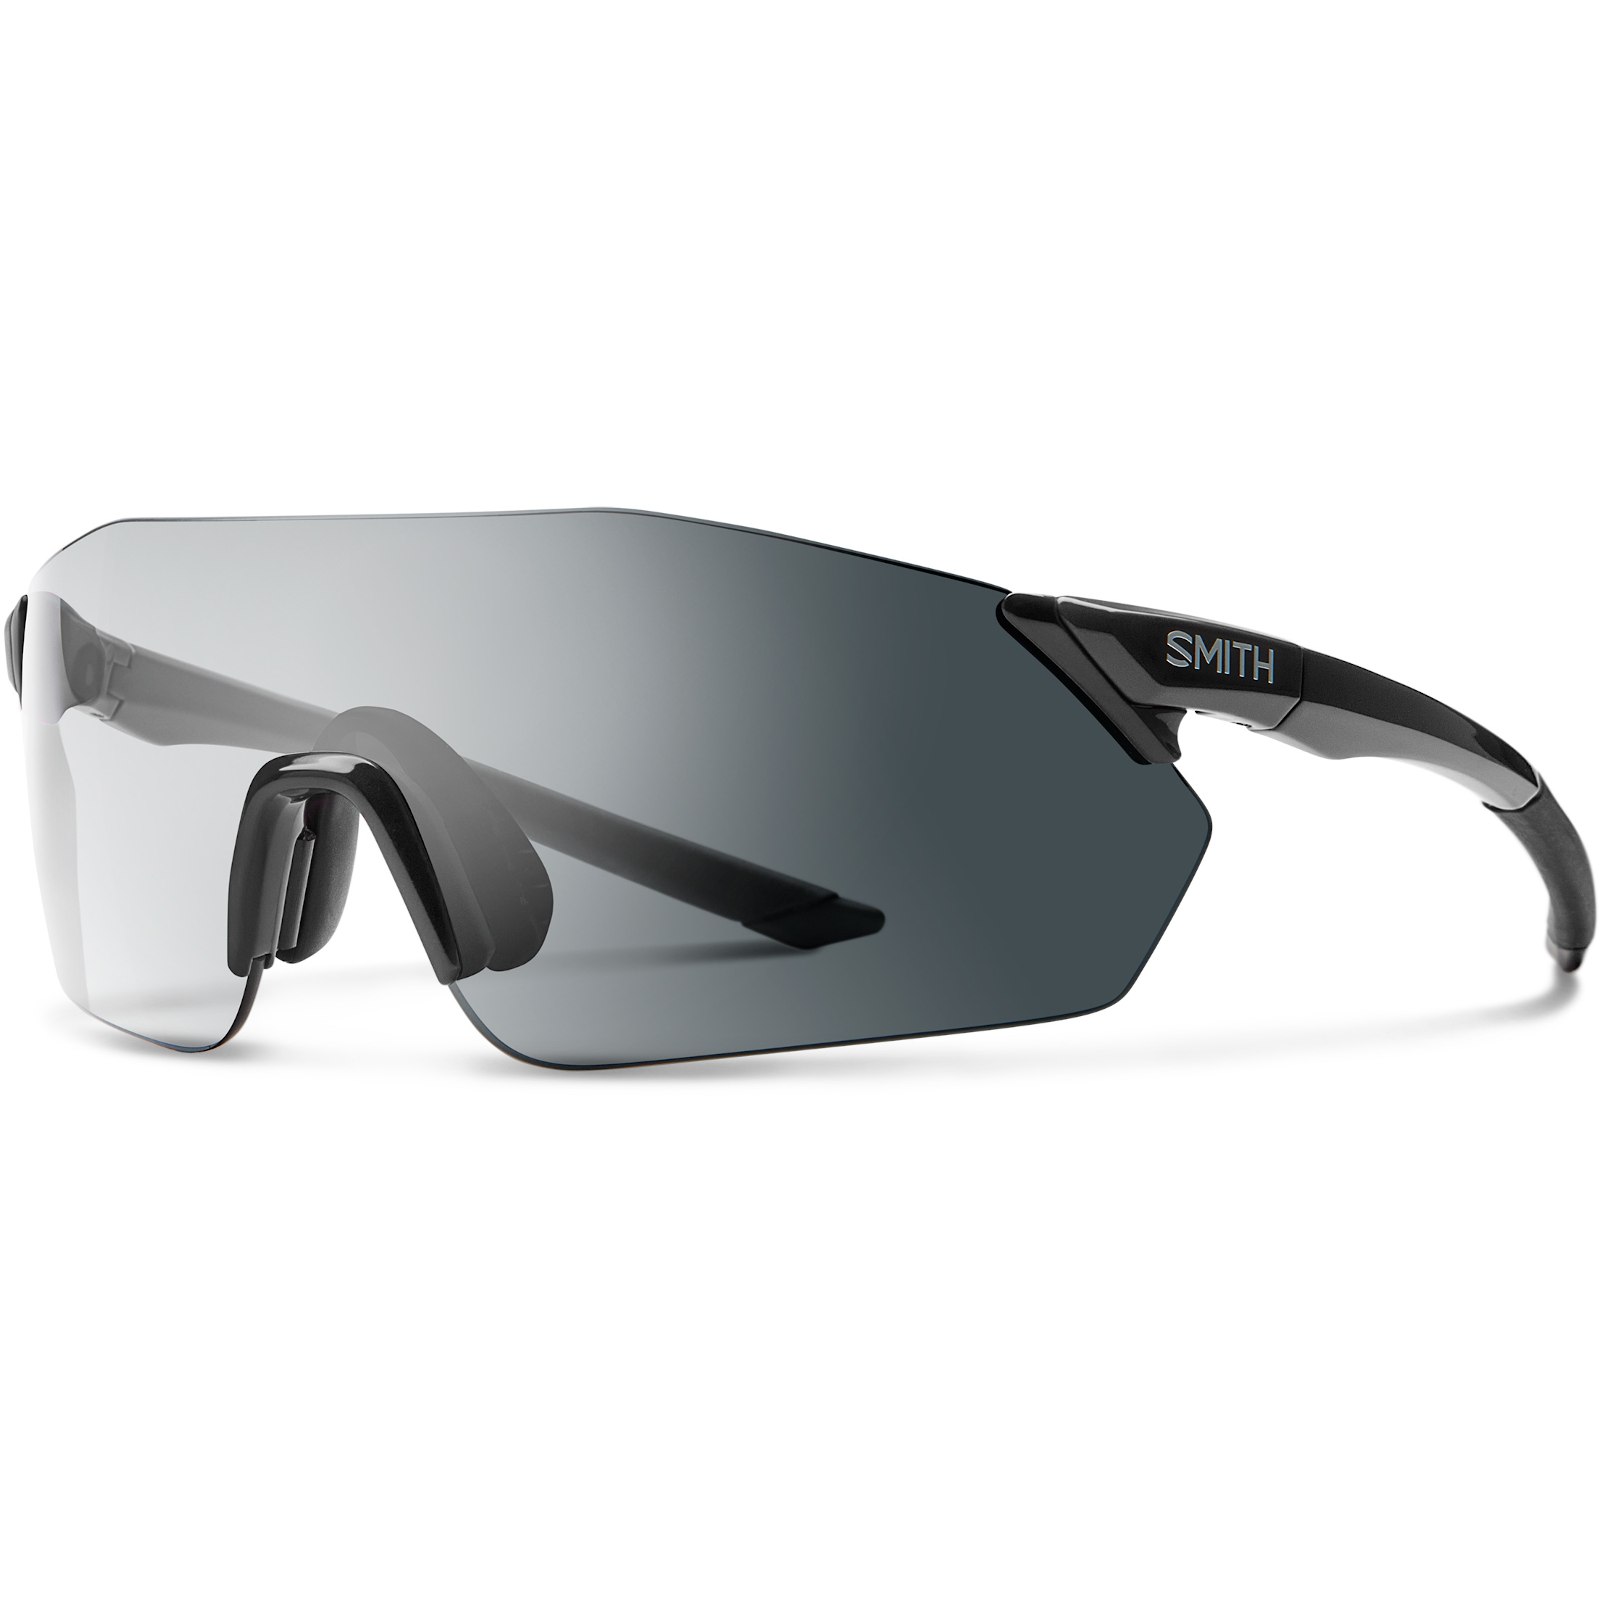 Picture of Smith PivLock™ Reverb Glasses - Black - Photochromic Clear to Gray + ChromaPop Contrast Rose